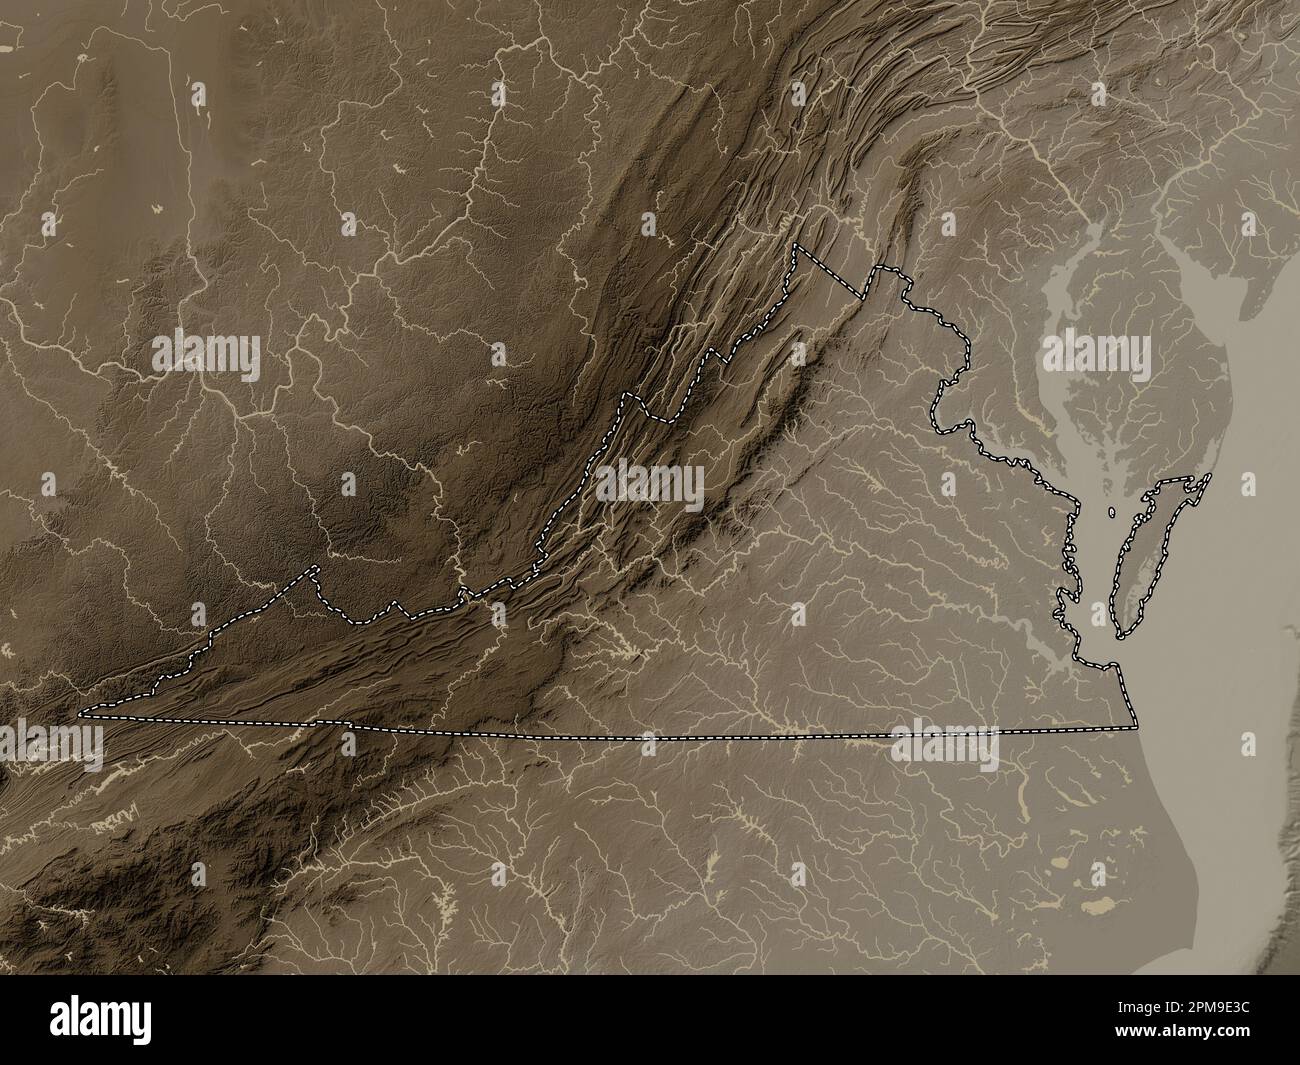 Virginia, state of United States of America. Elevation map colored in sepia tones with lakes and rivers Stock Photo